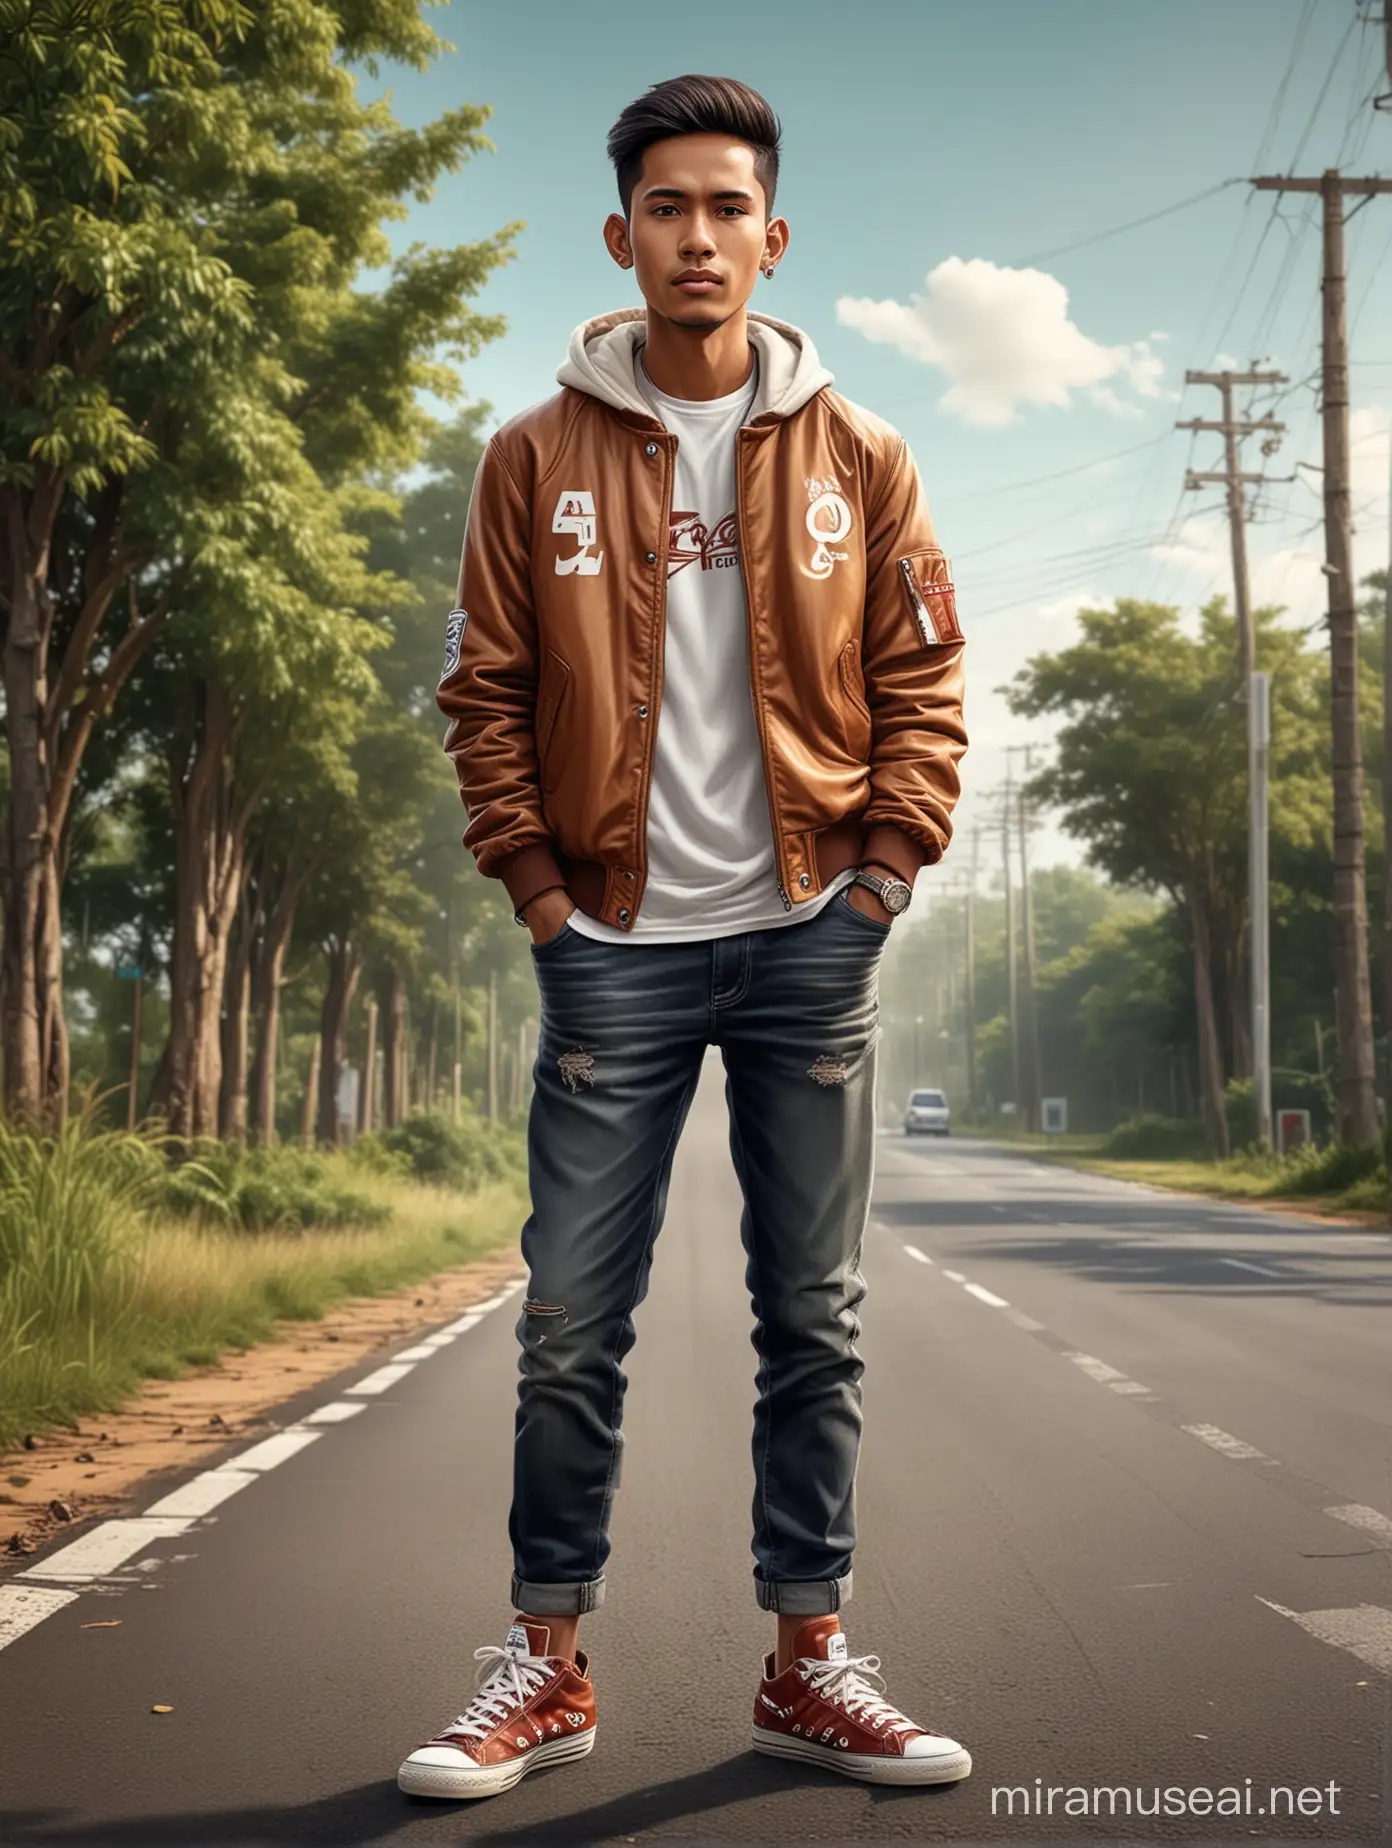 UltraRealistic Caricature of Handsome Indonesian Youth in Varsity Jacket on Rural Road